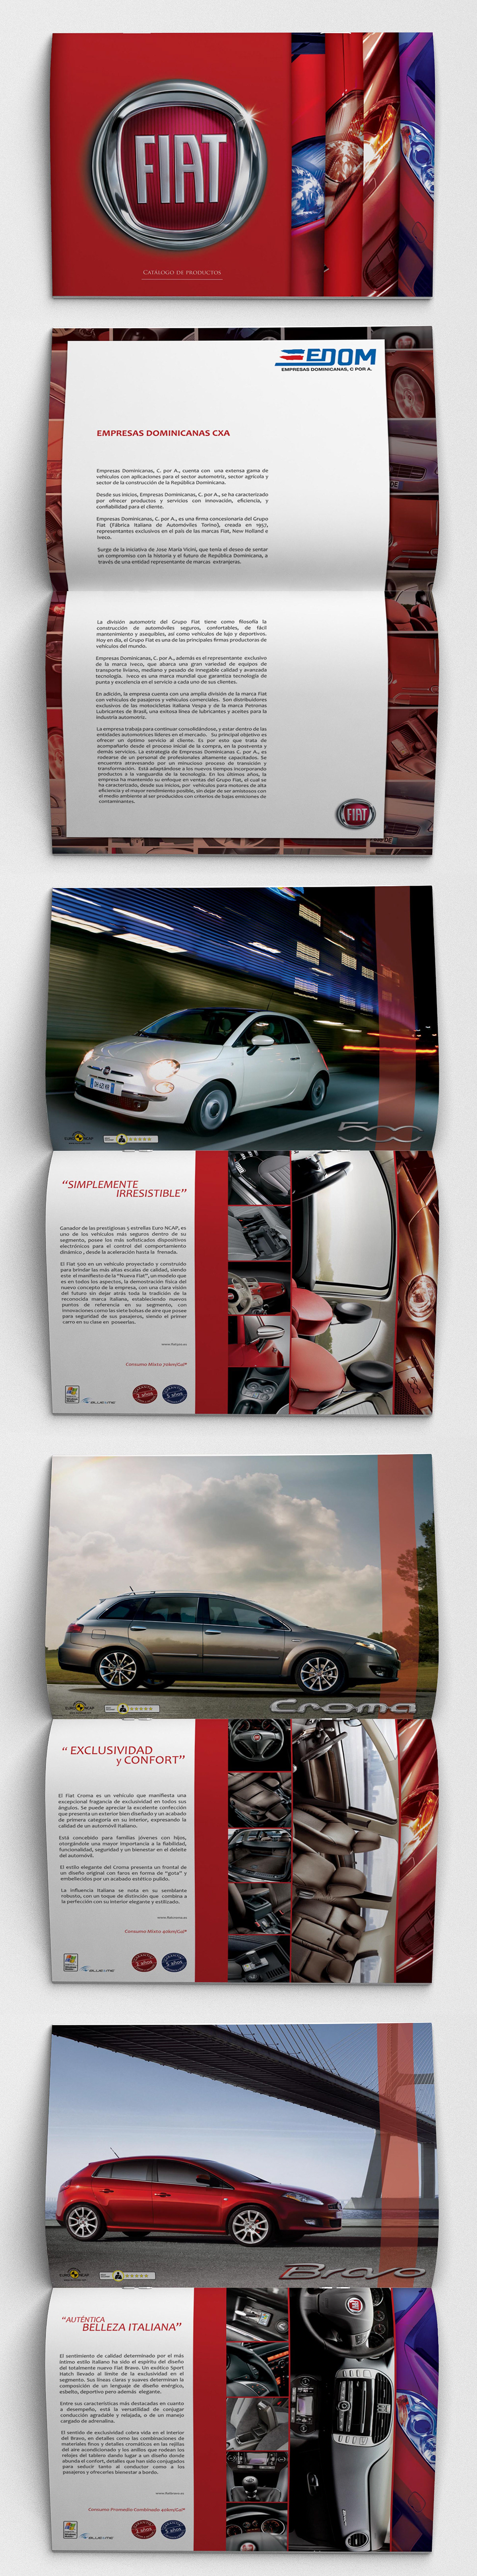 Catalogue  Car  red luxury